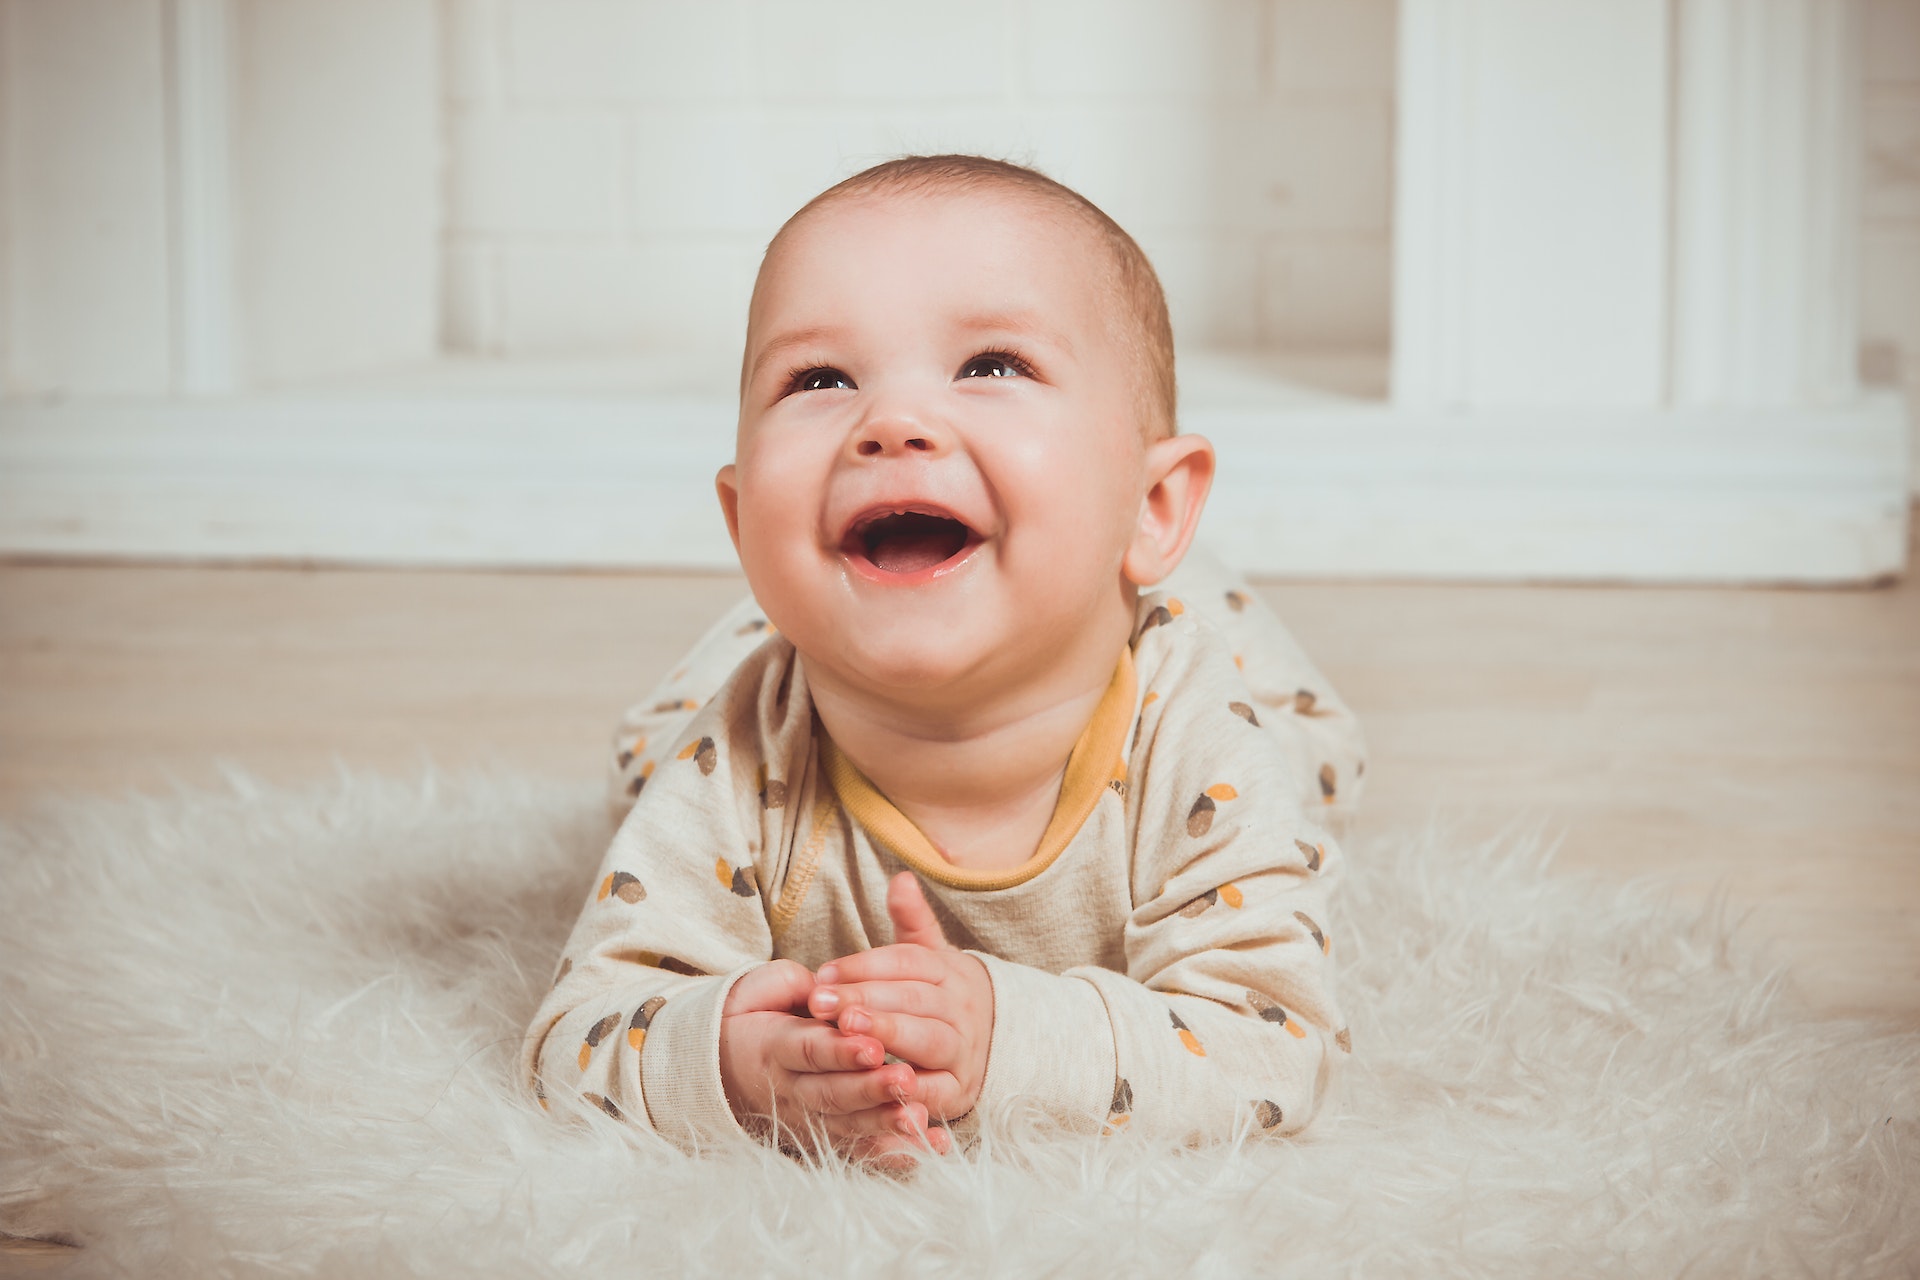 Baby names that will be the most popular in 2023